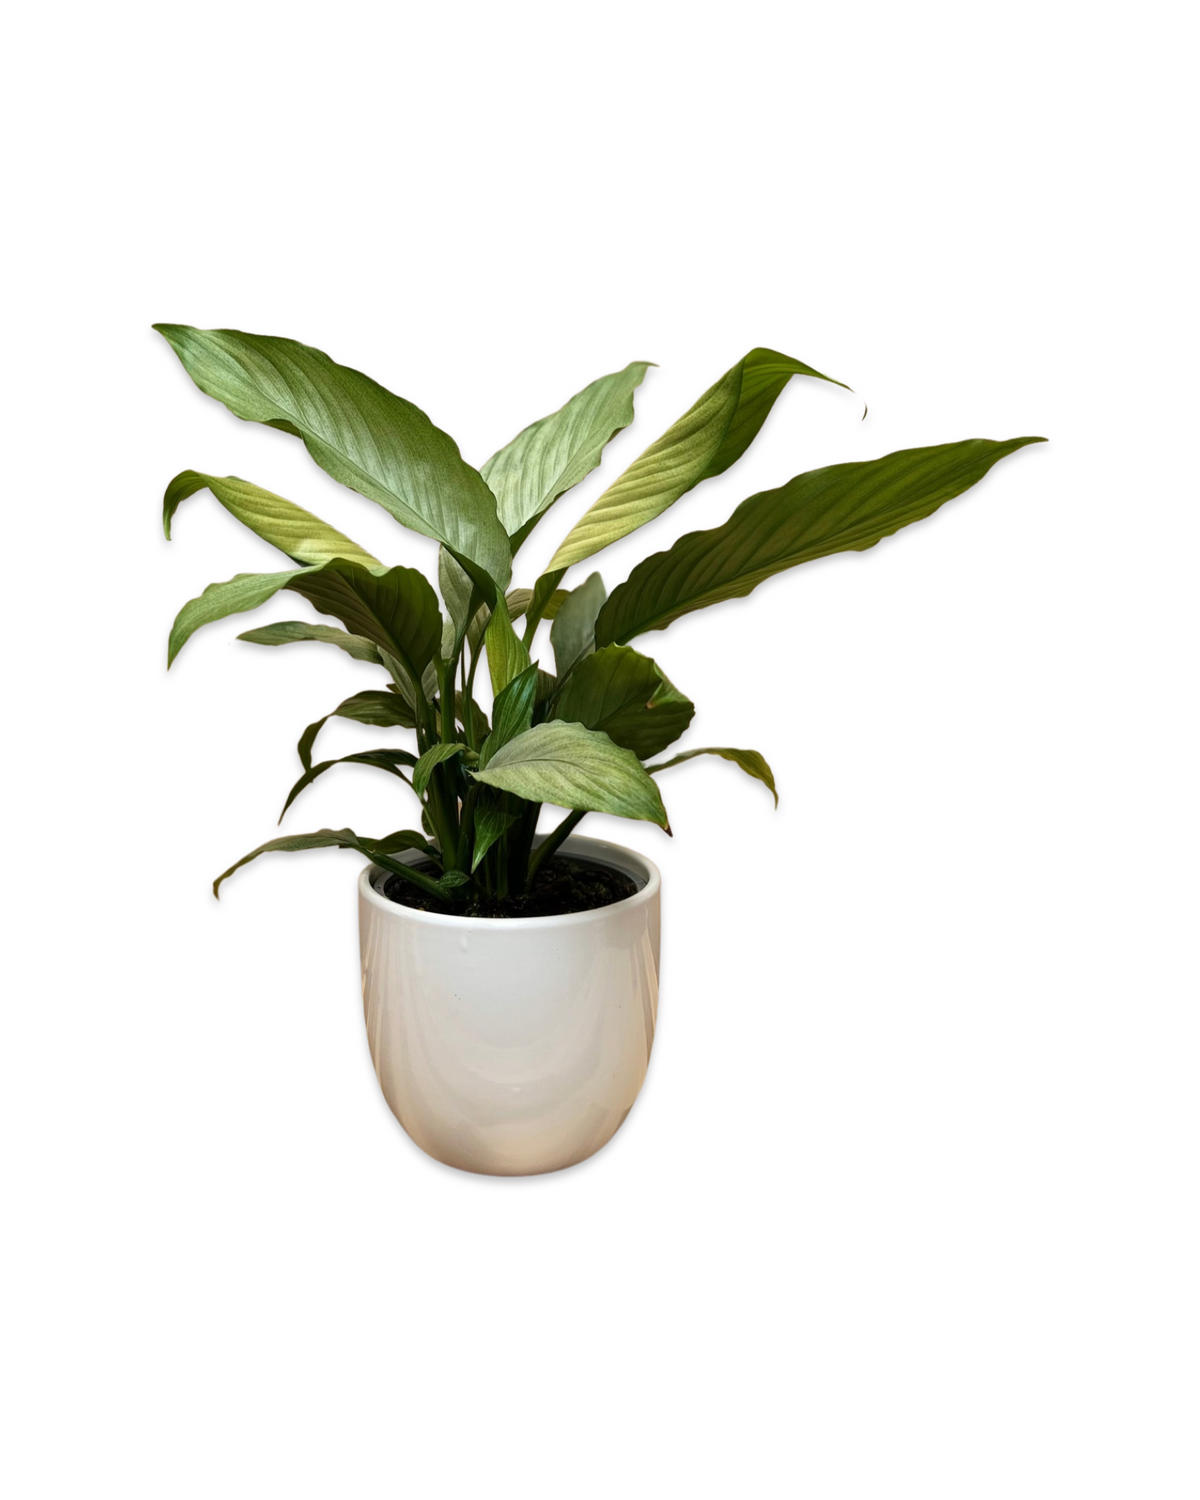 Spathiphyllum Silver - Peace Lily 20-25cm